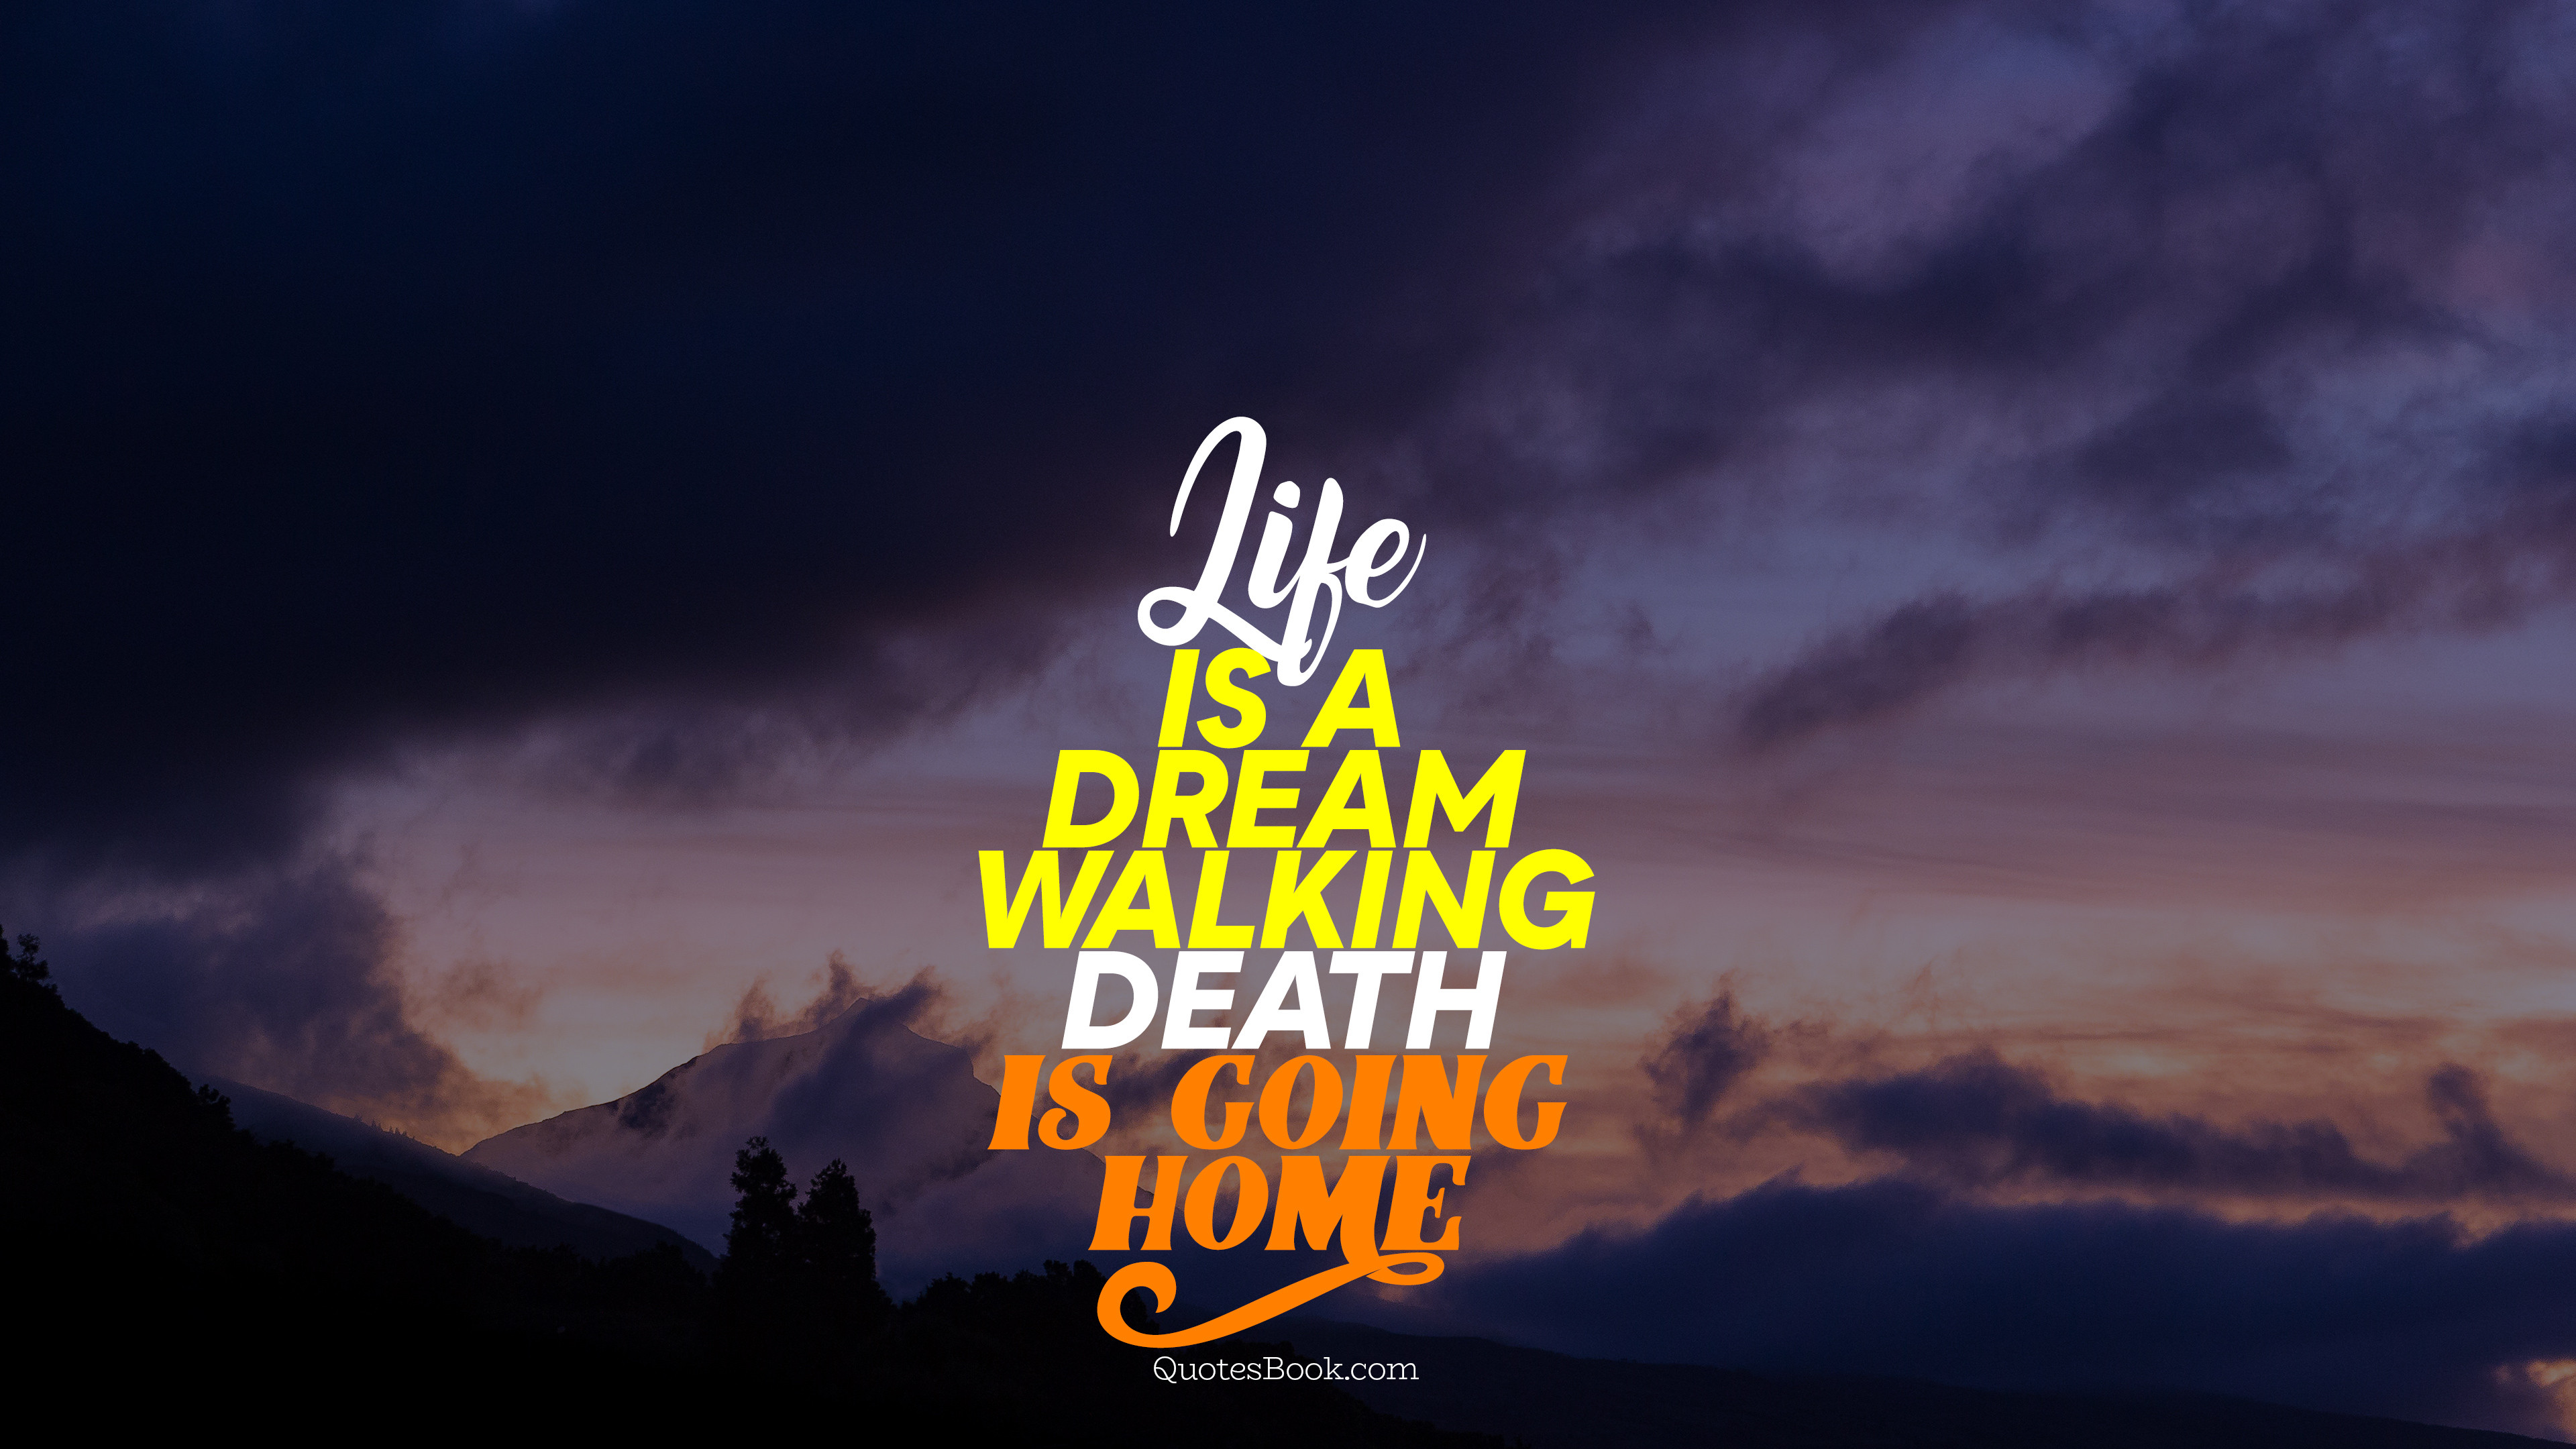 Life is a dream walking death is going home - QuotesBook